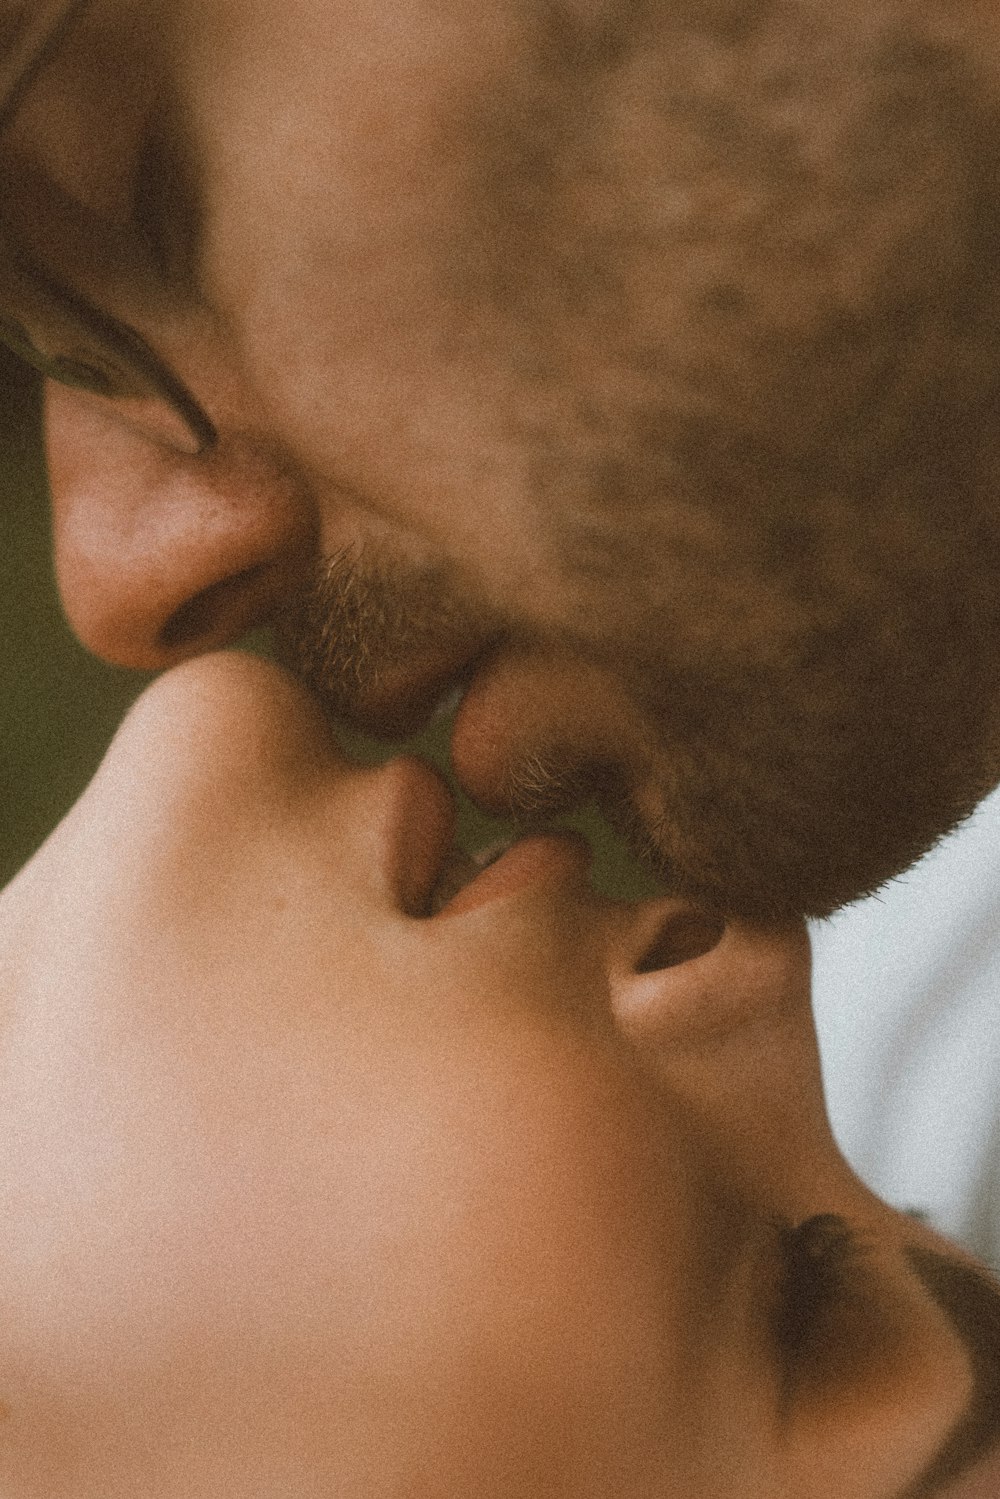 a close up of a person kissing another person